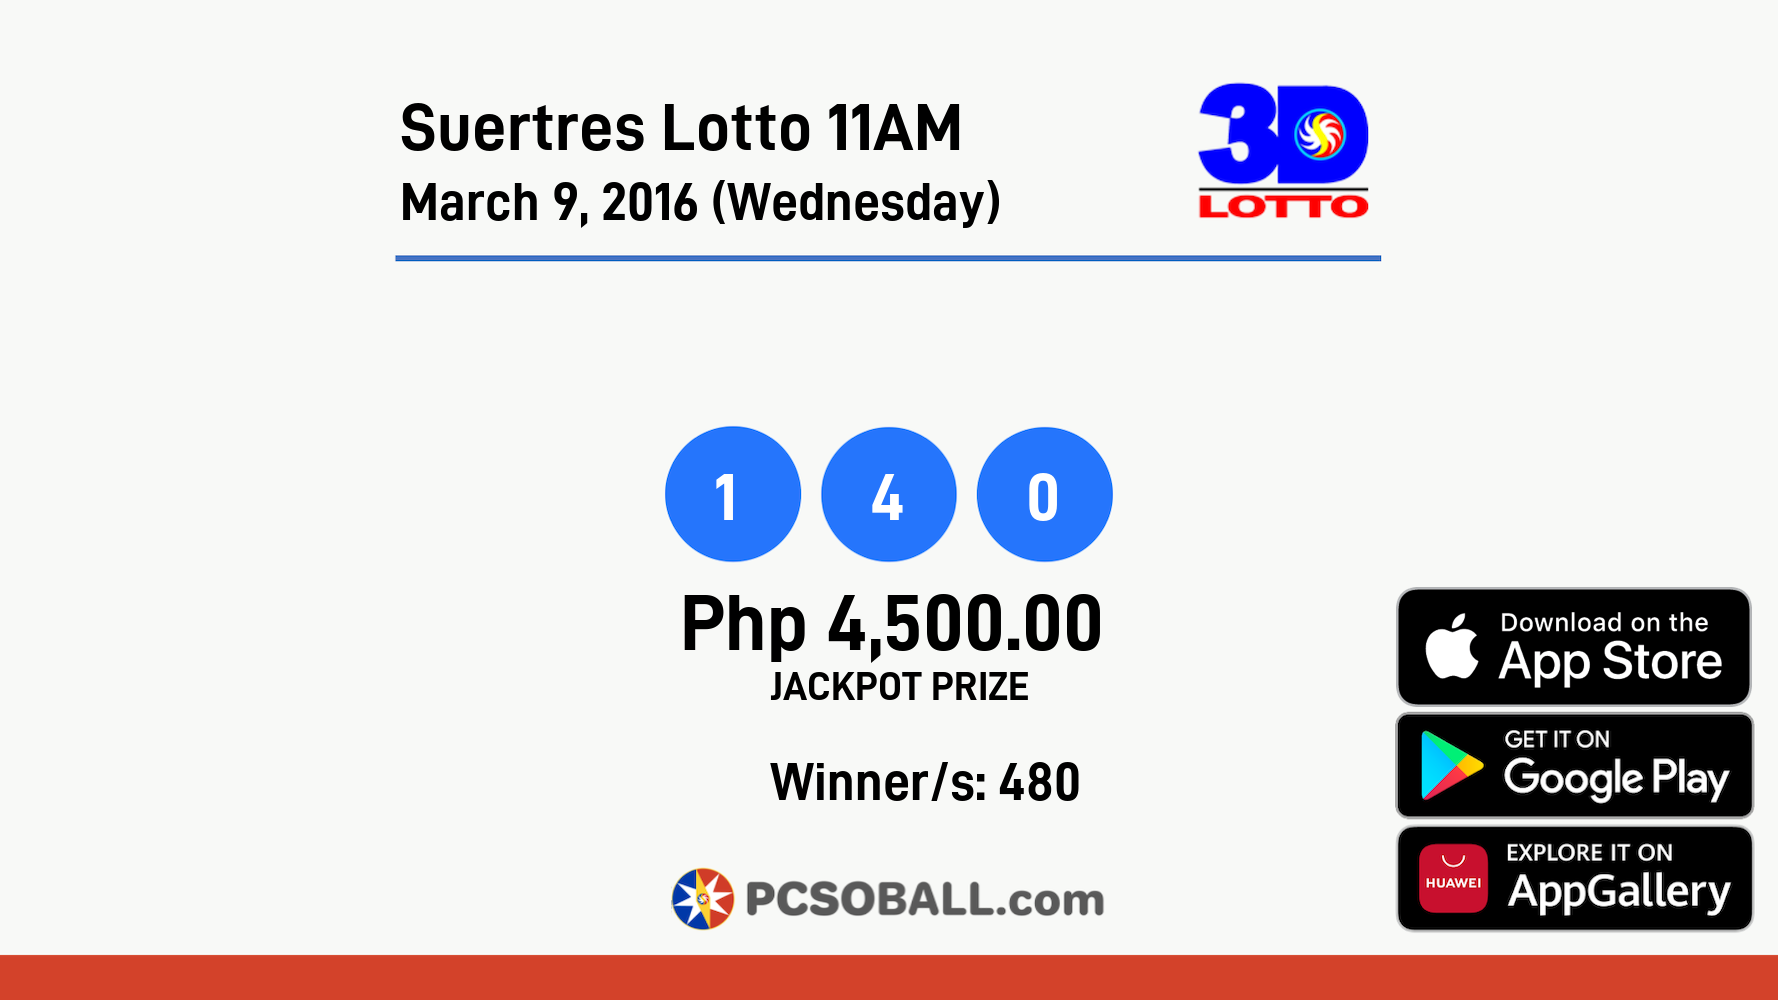 Suertres Lotto 11AM March 9, 2016 (Wednesday) Result